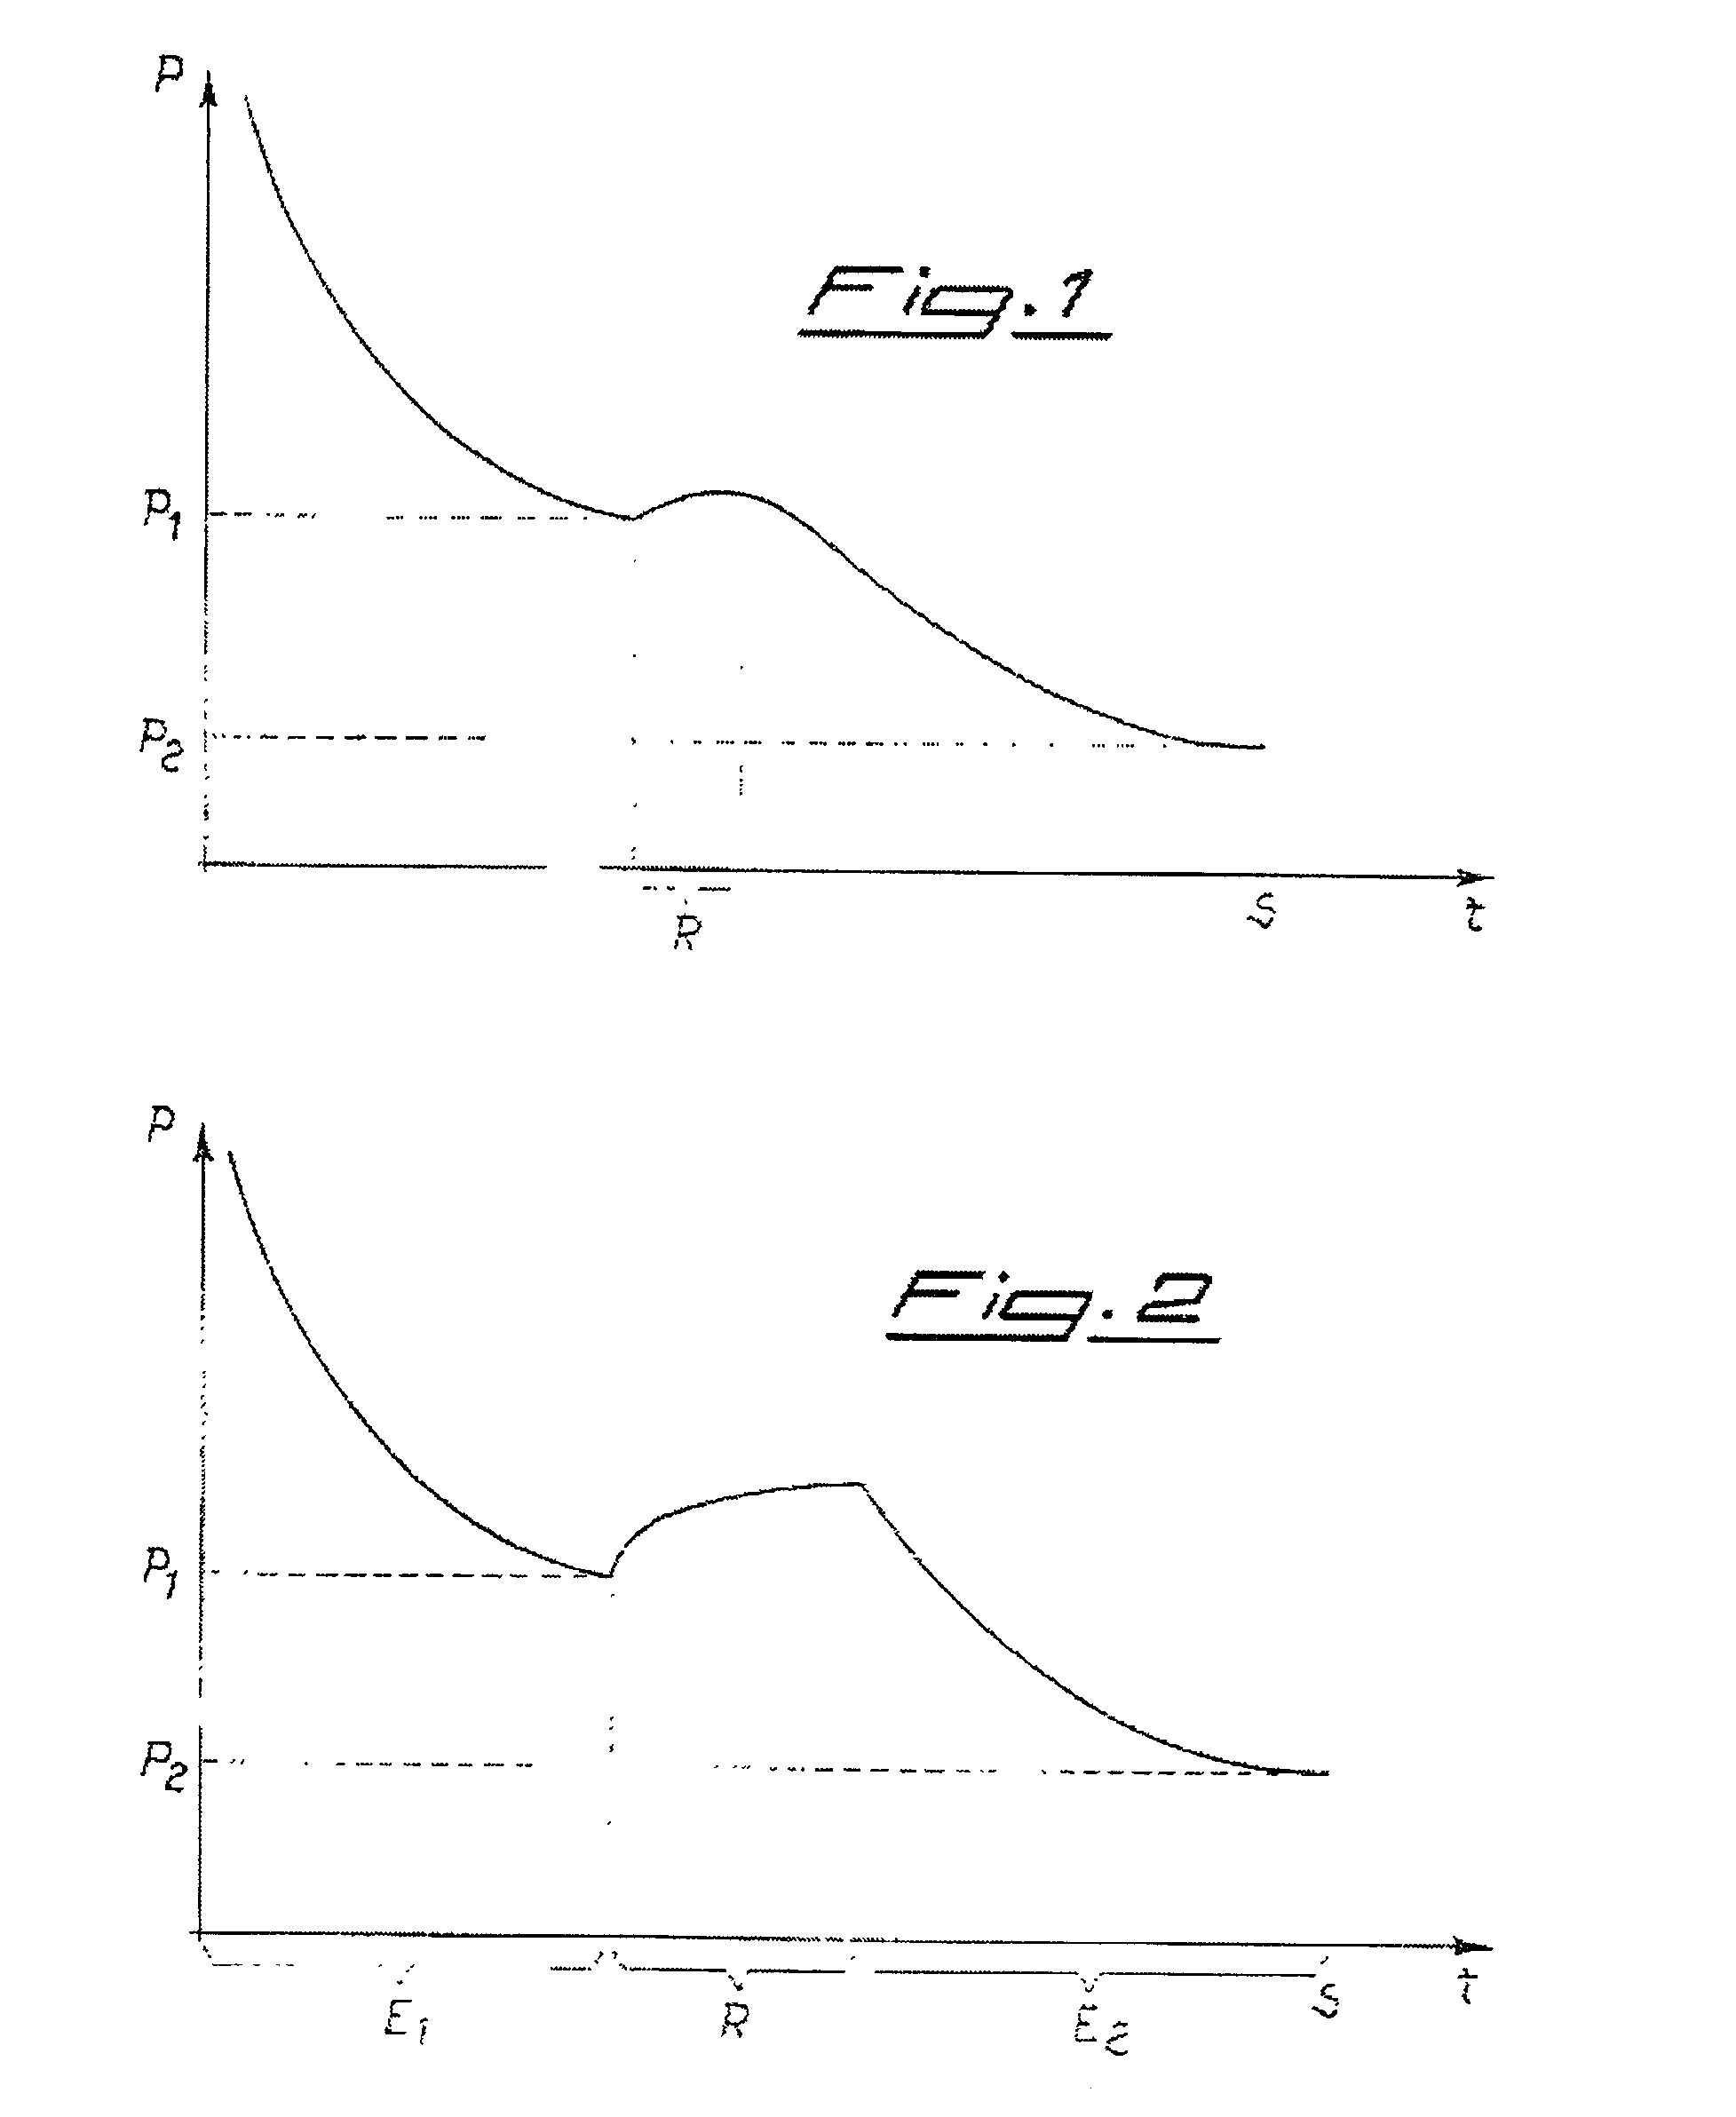 Process for depositing calcium getter thin films inside systems operating under vacuum